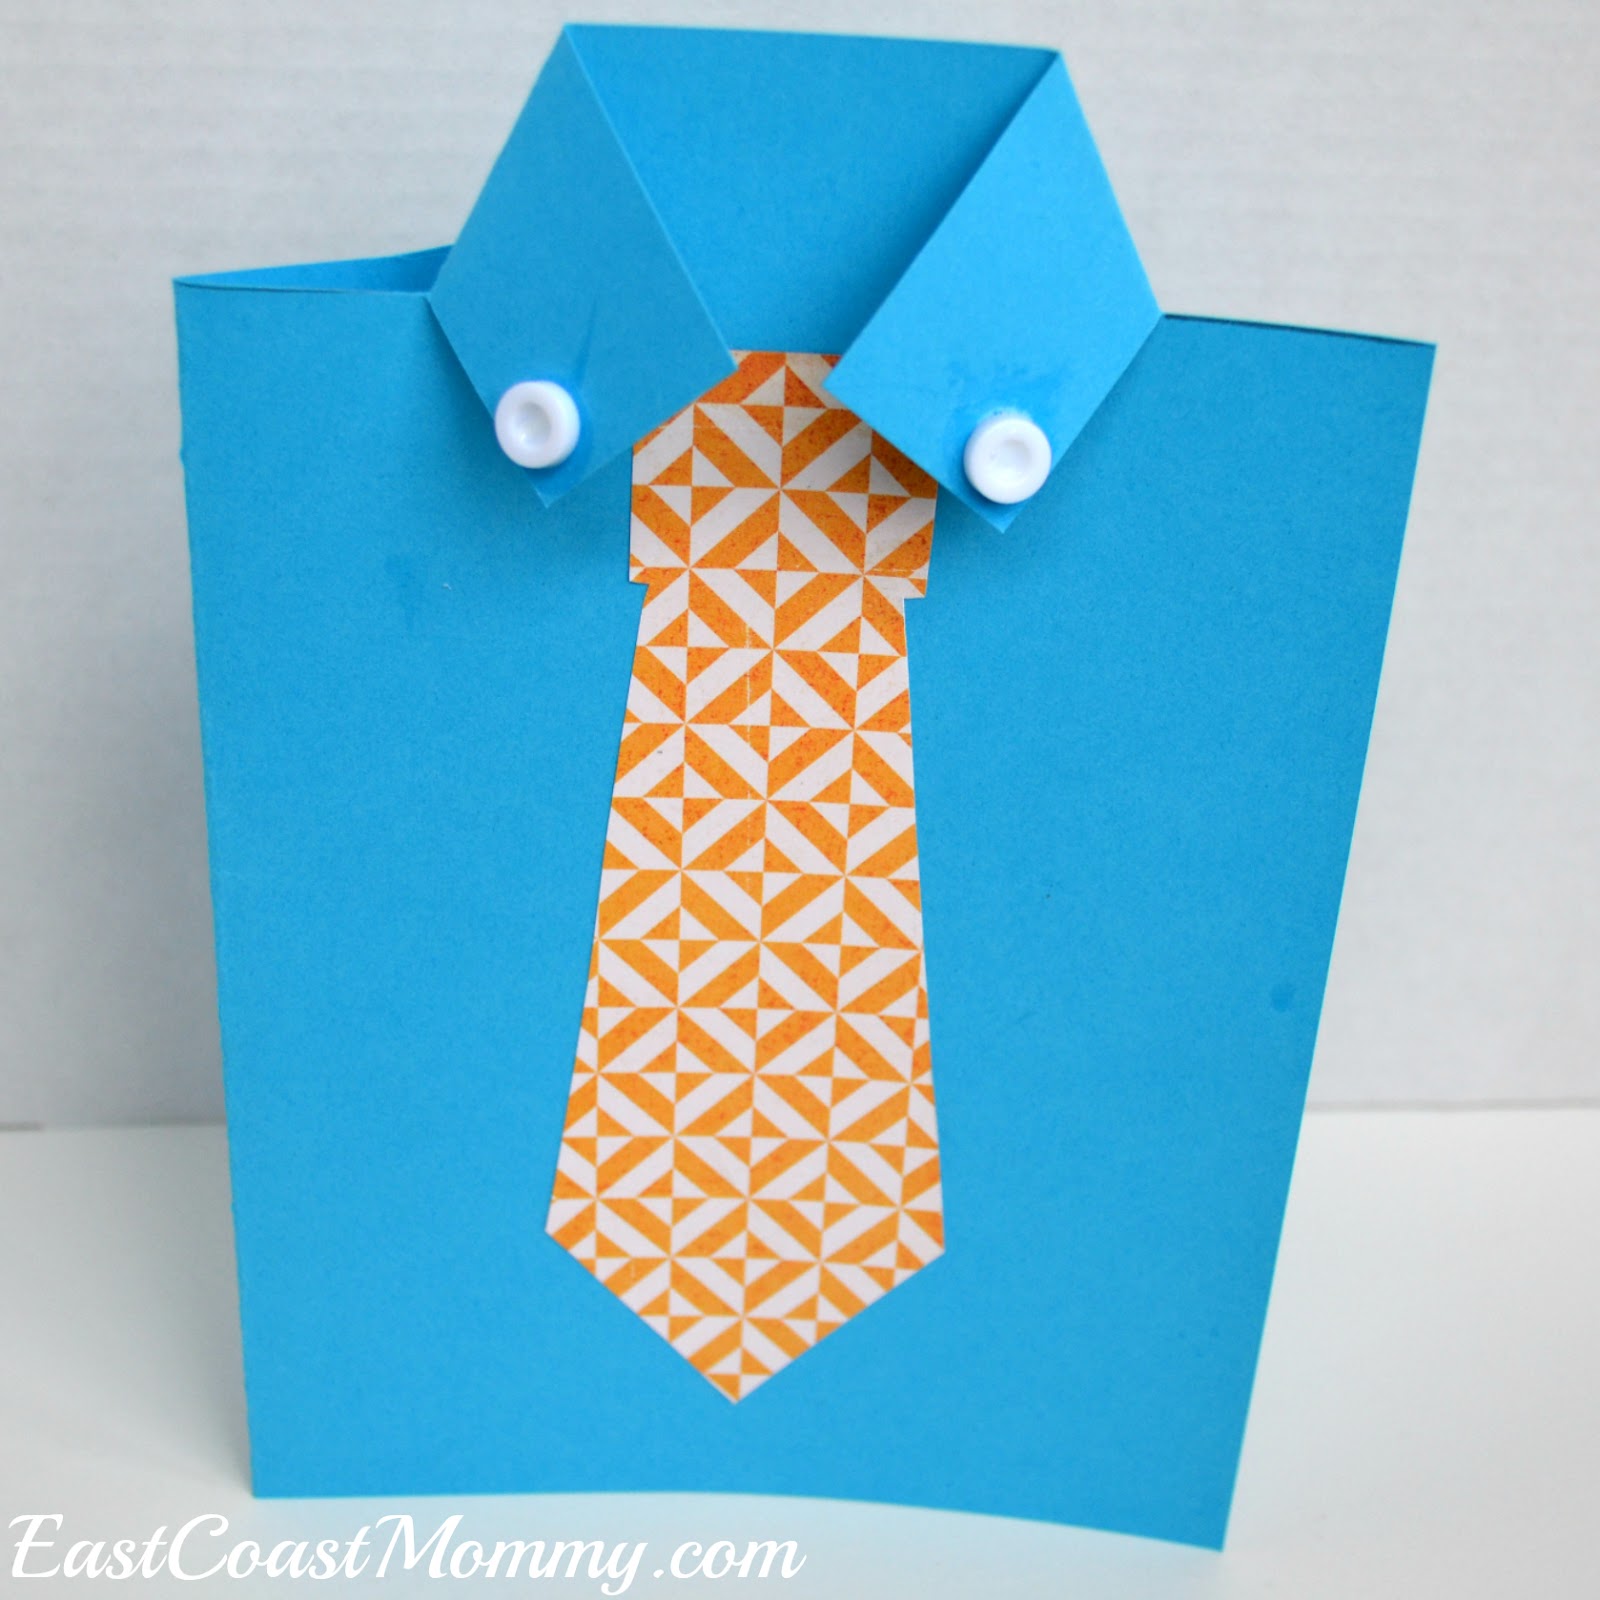 east-coast-mommy-shirt-and-tie-father-s-day-card